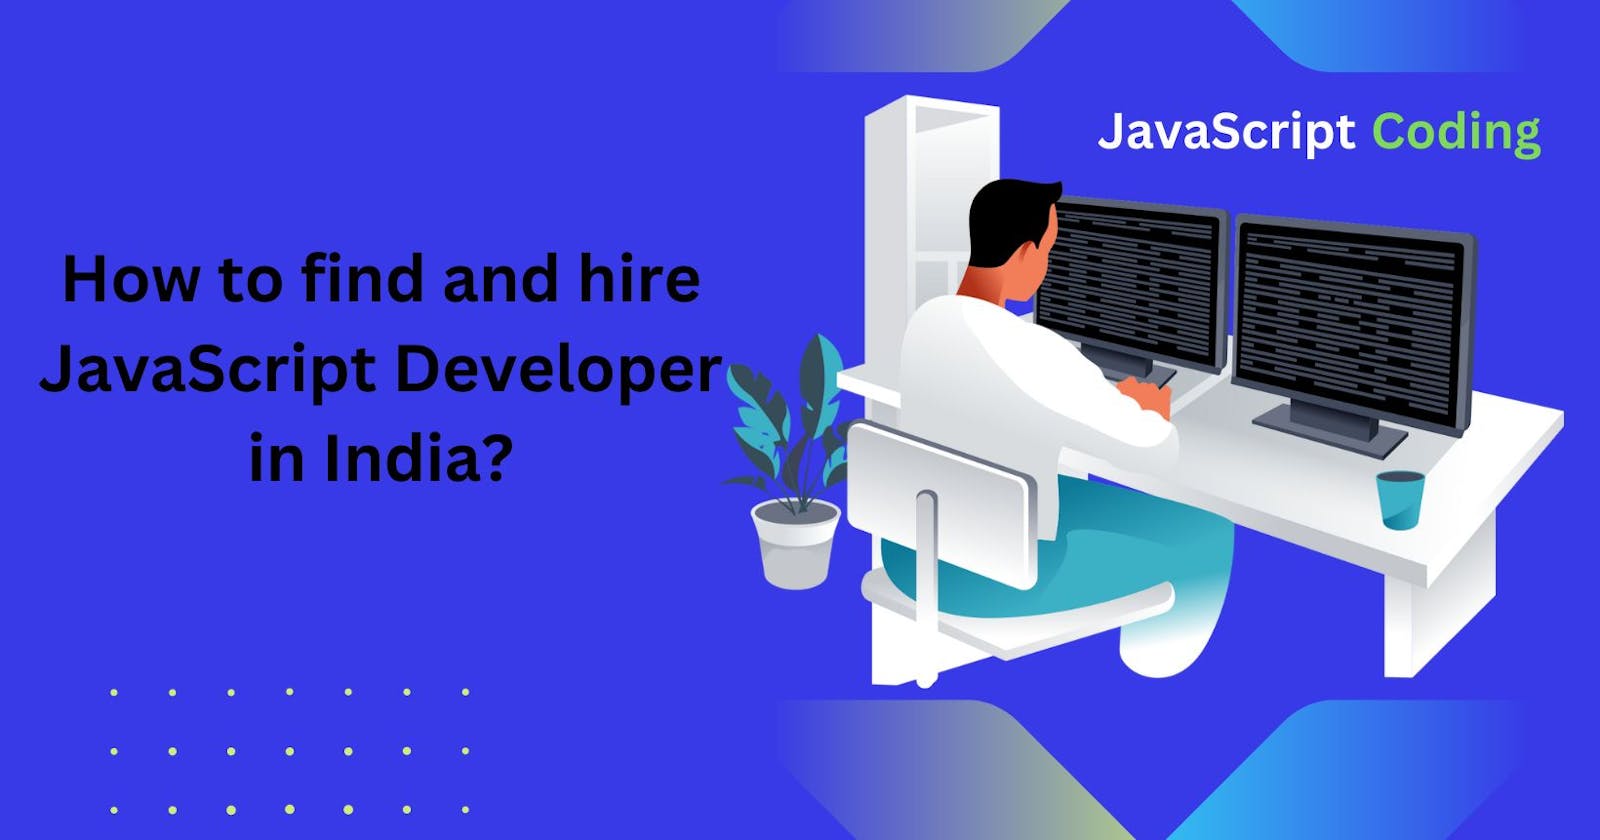 How to find and hire JavaScript Developer in India?